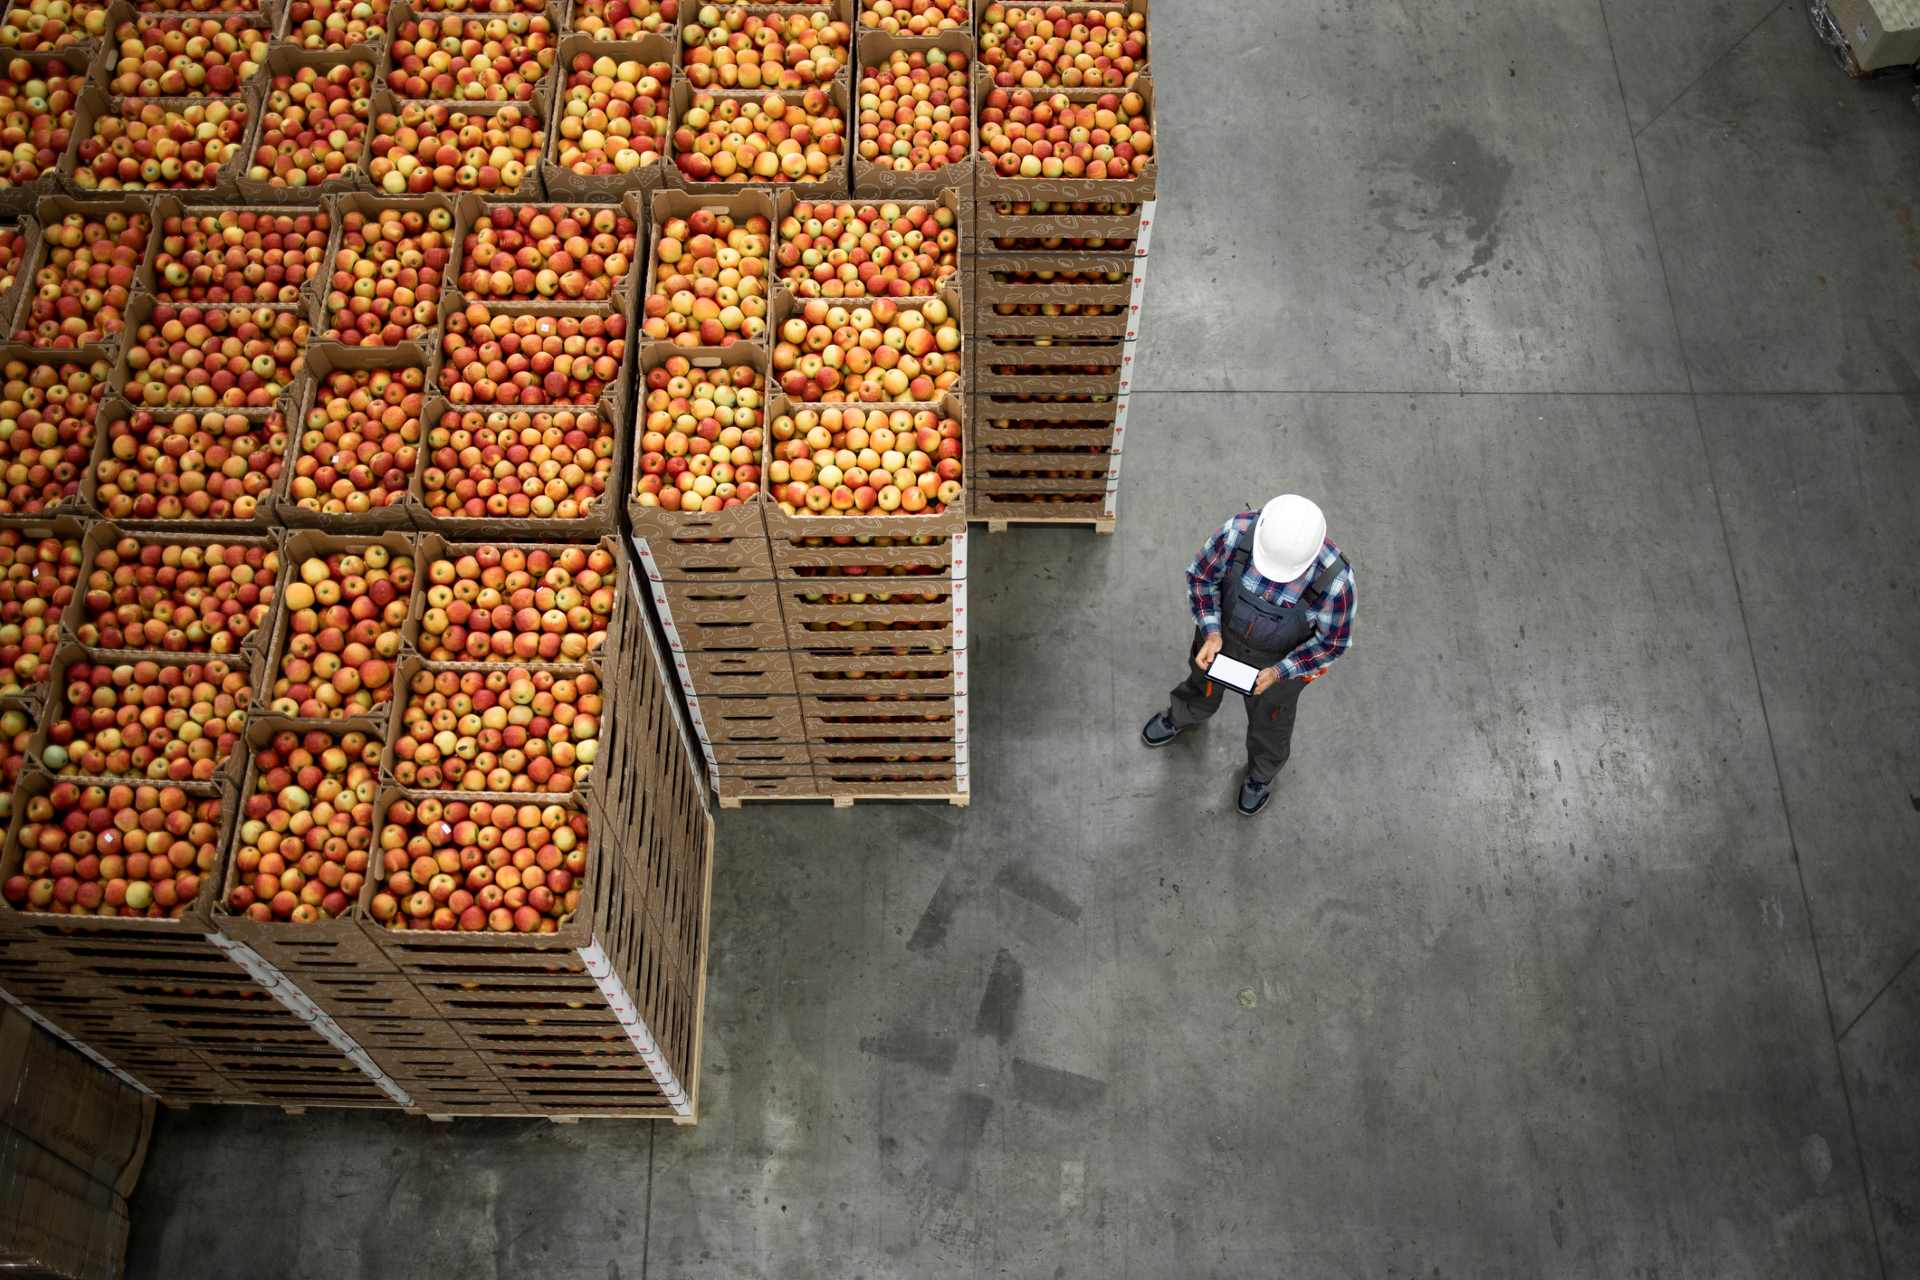 Crates of apples waiting to be shipped warehouse worker checking paperwork